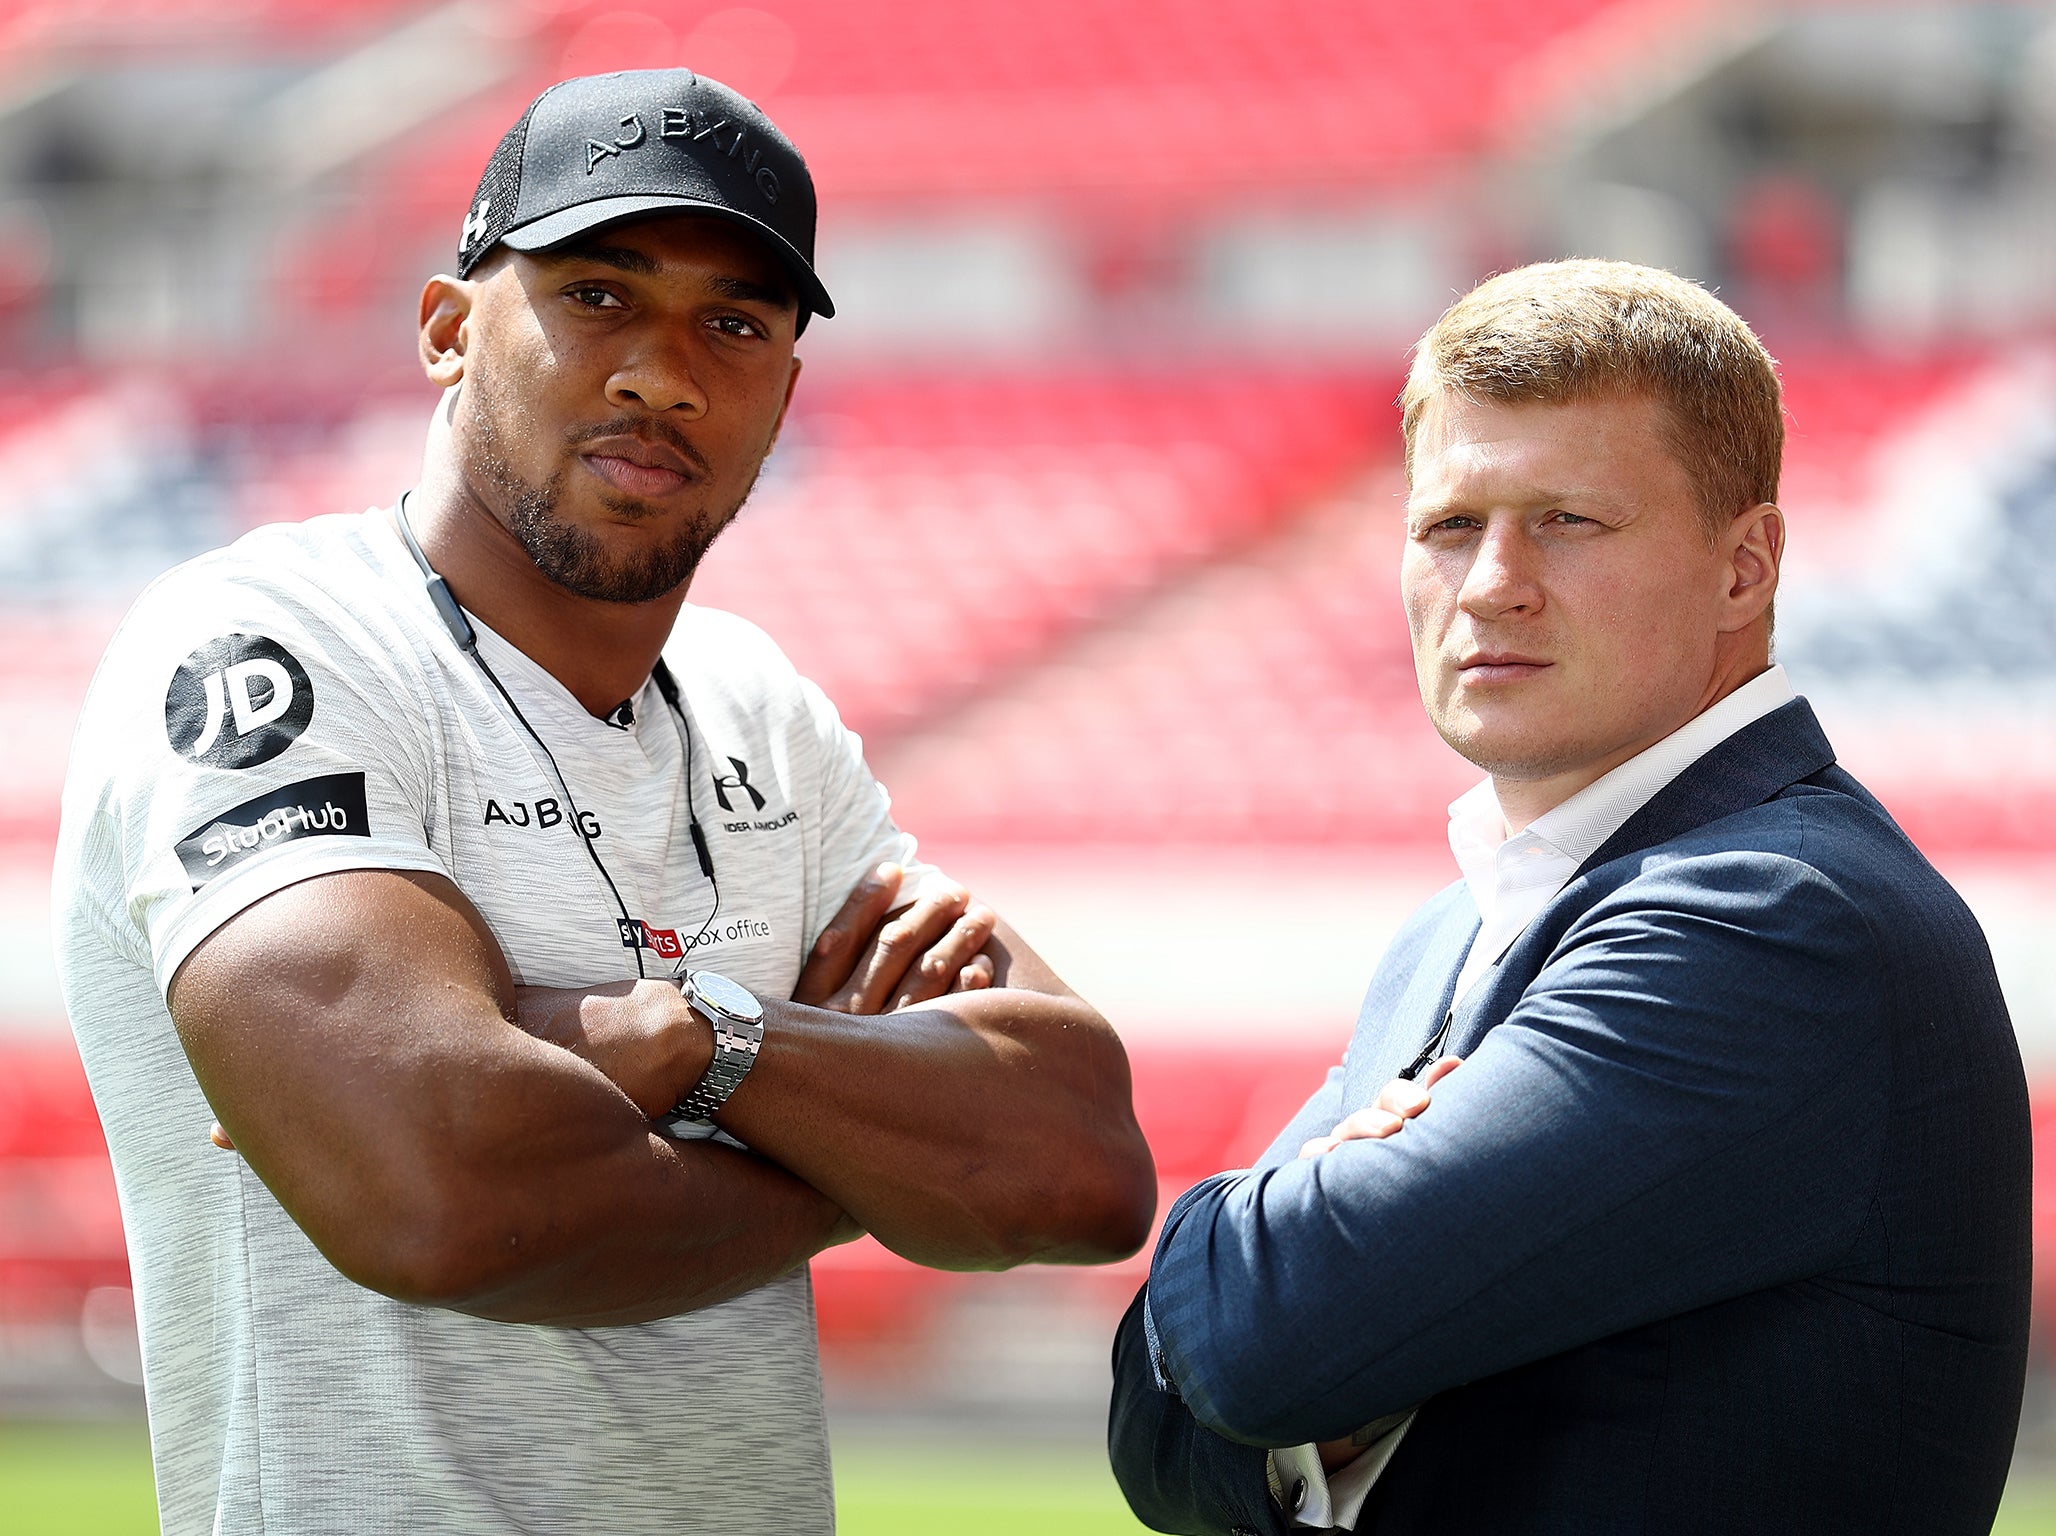 Joshua takes on Povetkin later this month